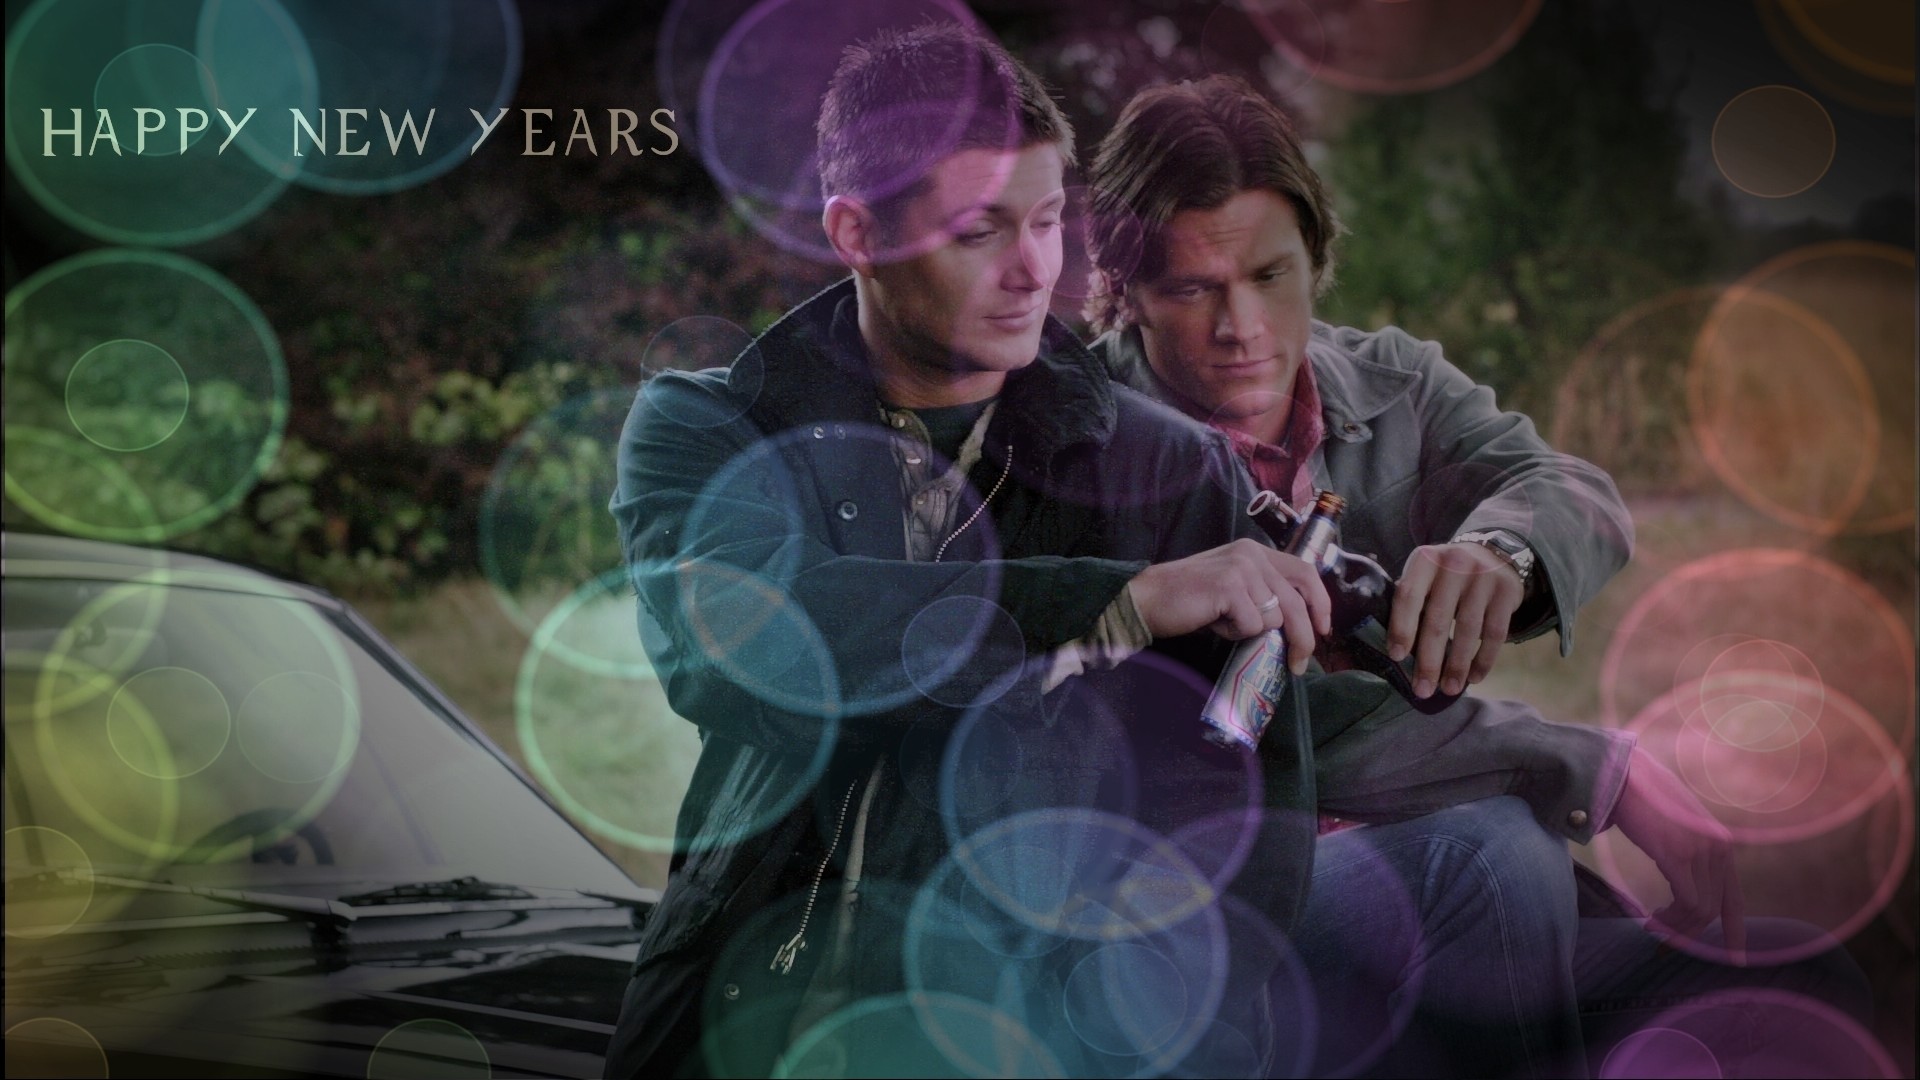 1920x1080 Supernatural images Happy New Year HD wallpaper and background photos